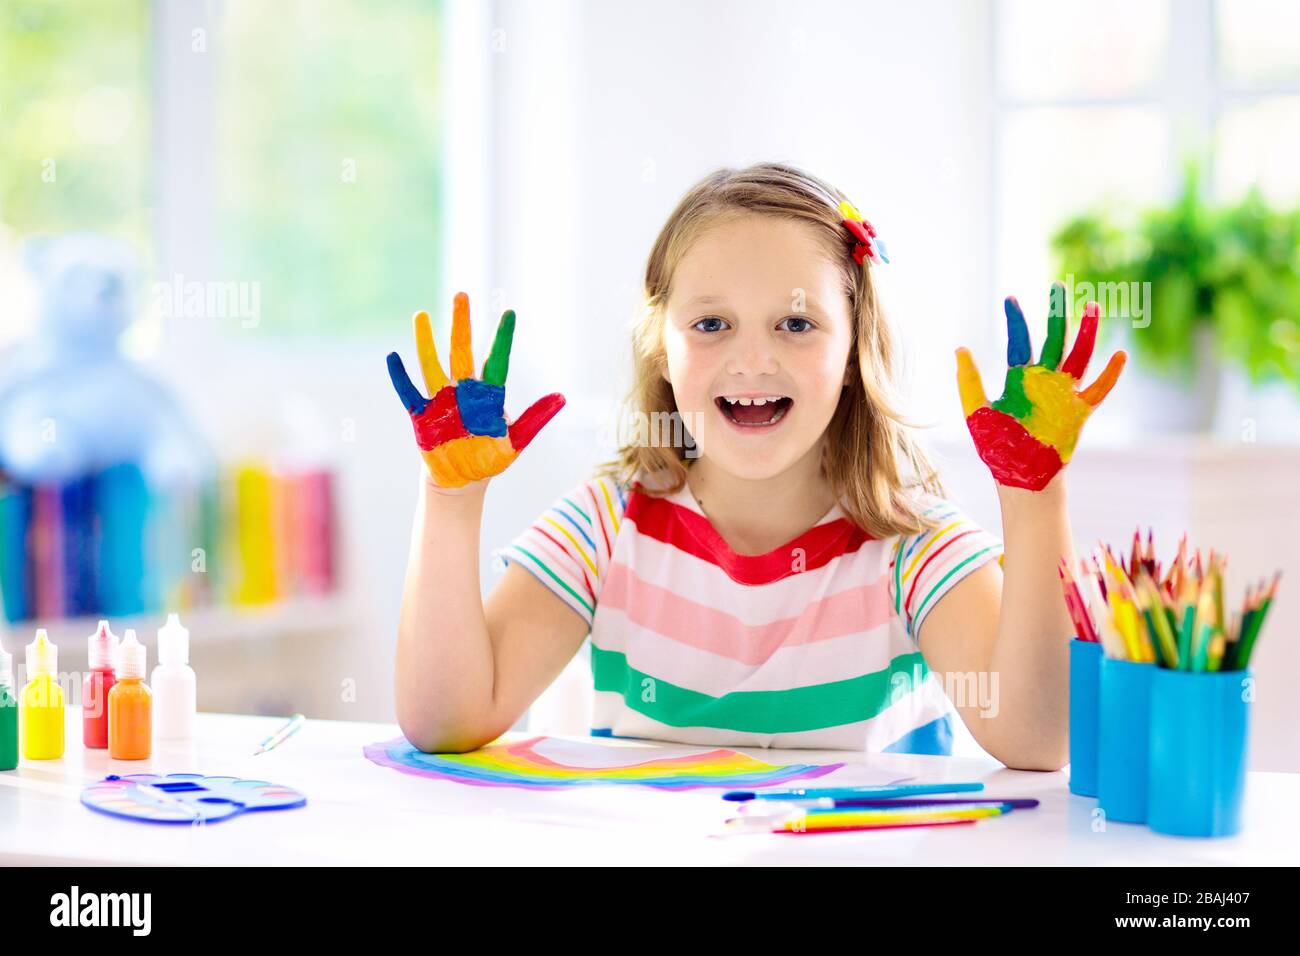 Kids paint. Child painting in white sunny study room. Little boy